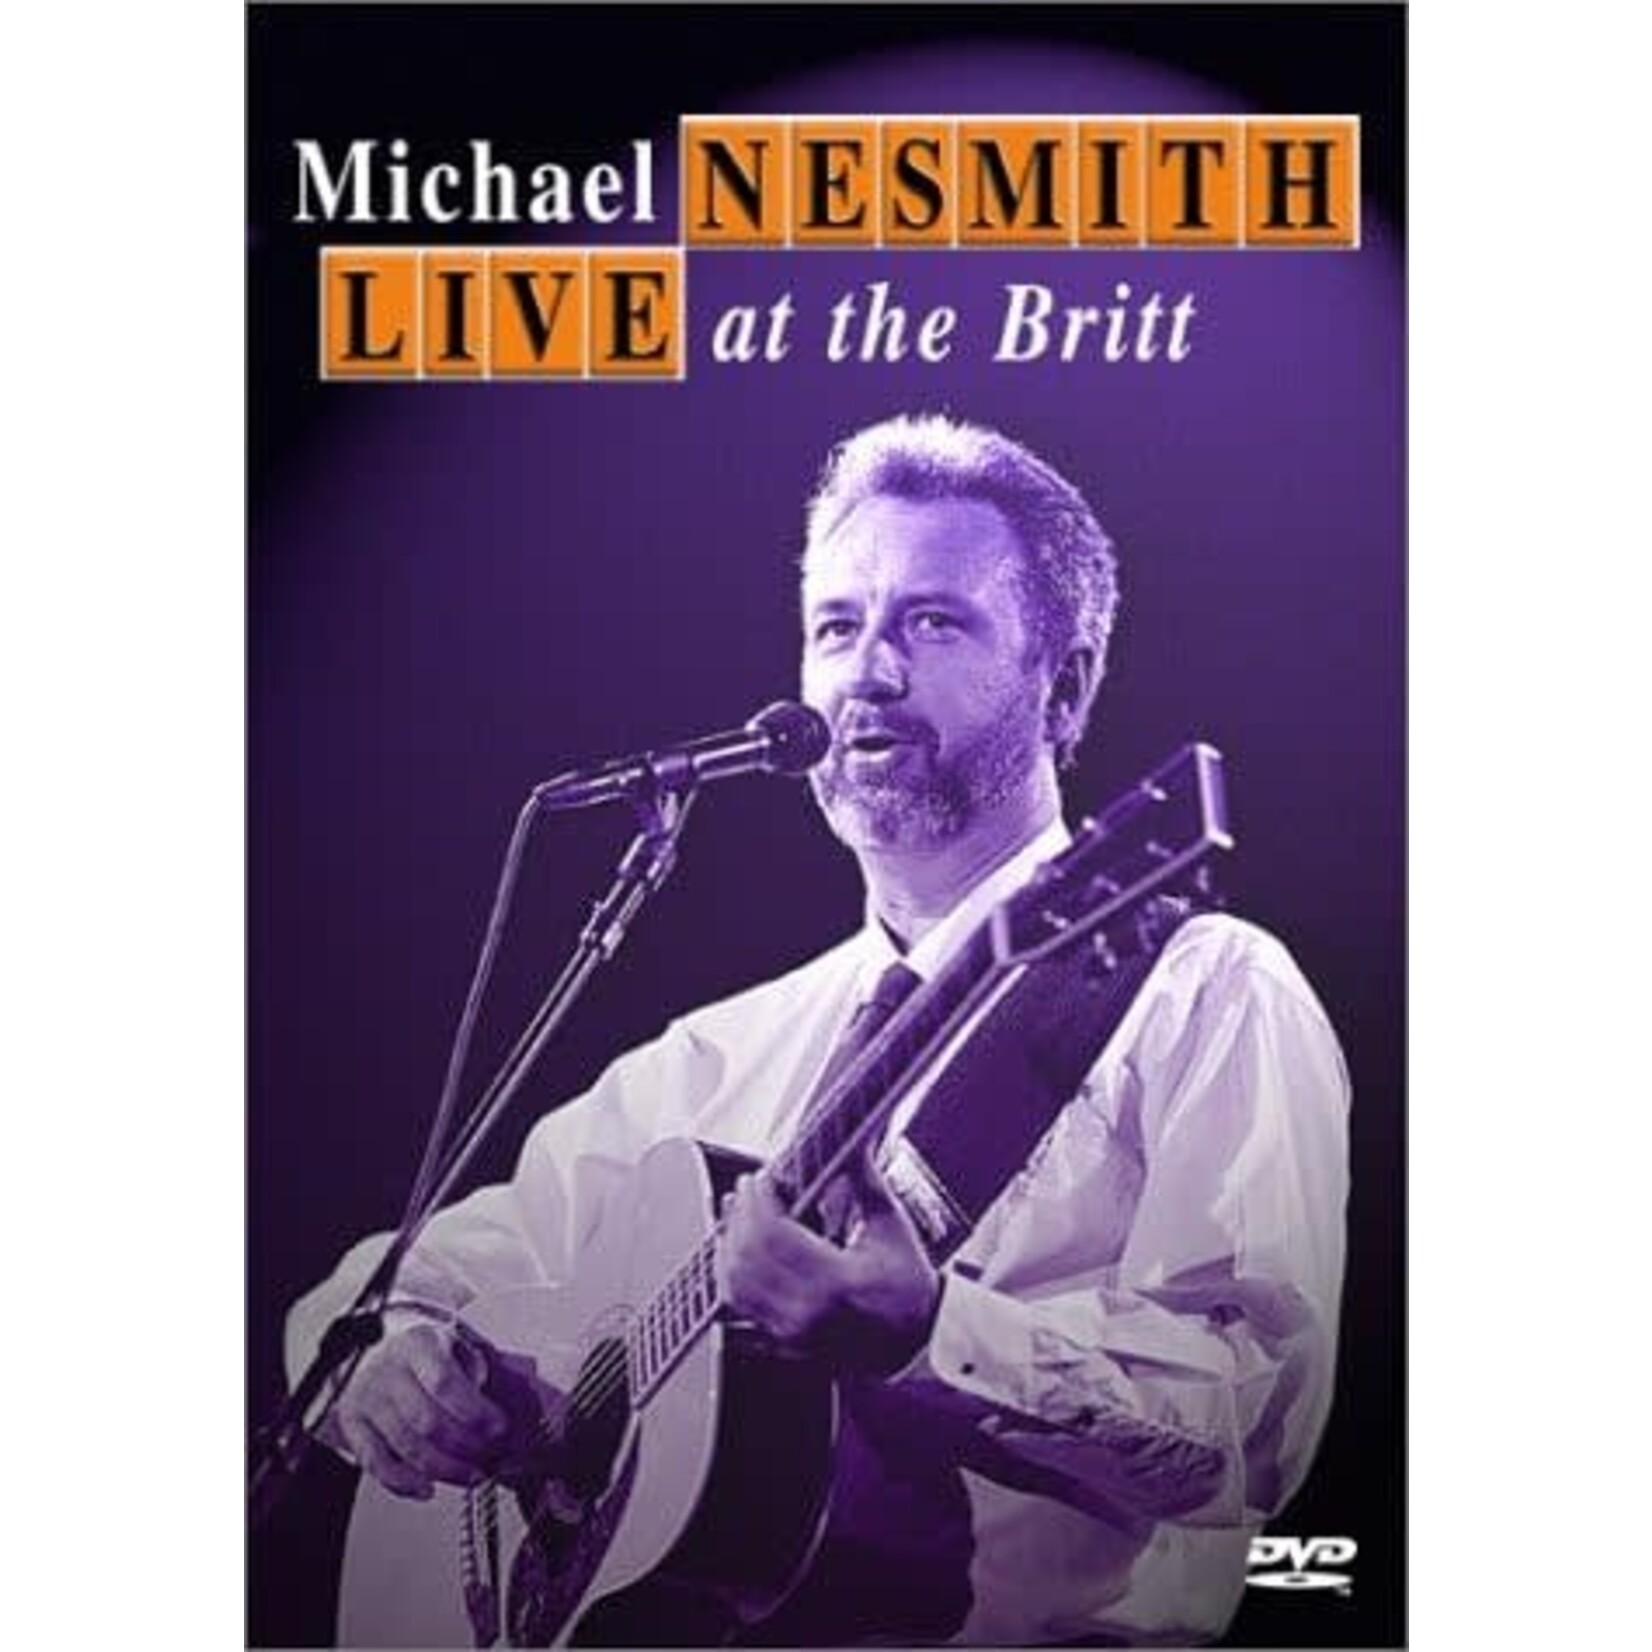 Michael Nesmith - Live At The Britt [USED DVD]